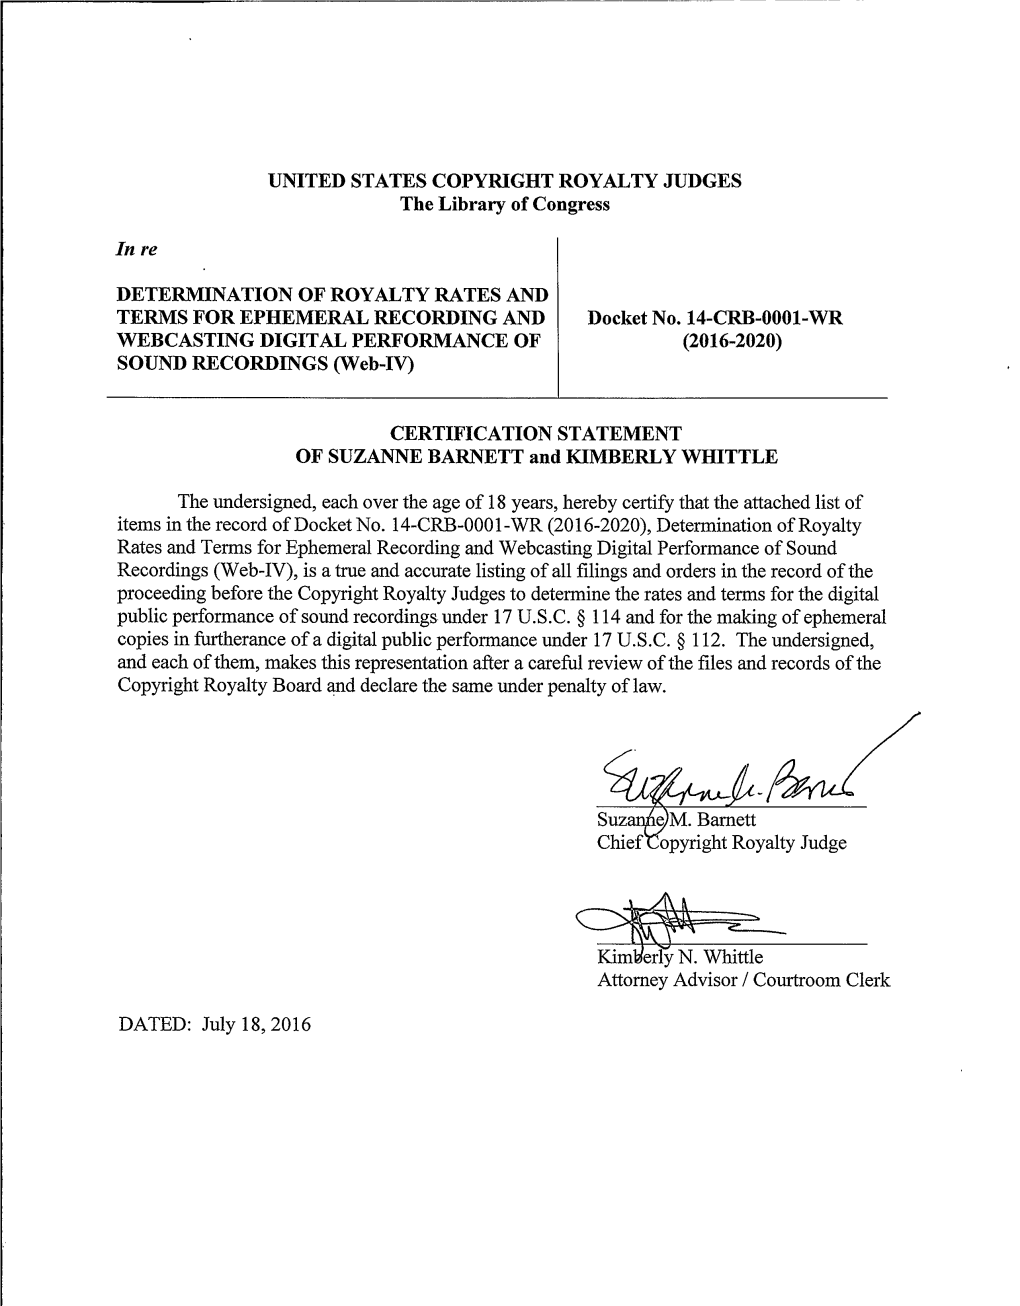 CERTIFICATION STATEMENT of SUZANNE BARNETT and KIMBERLY WHITTLE